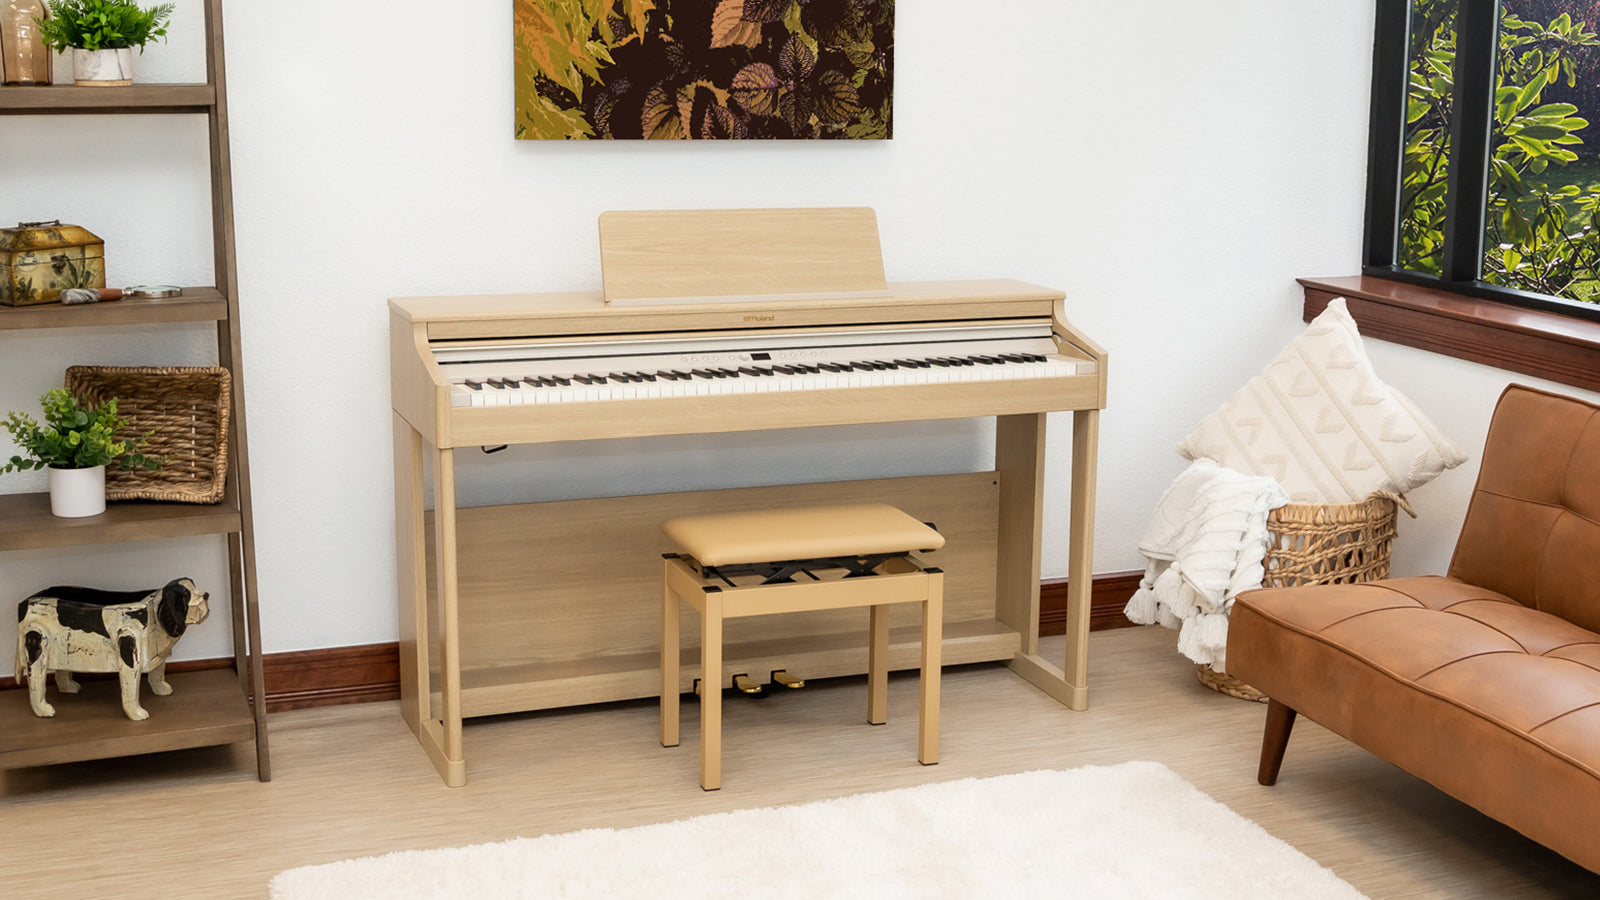 A Roland RP701 digital piano in a stylish living room